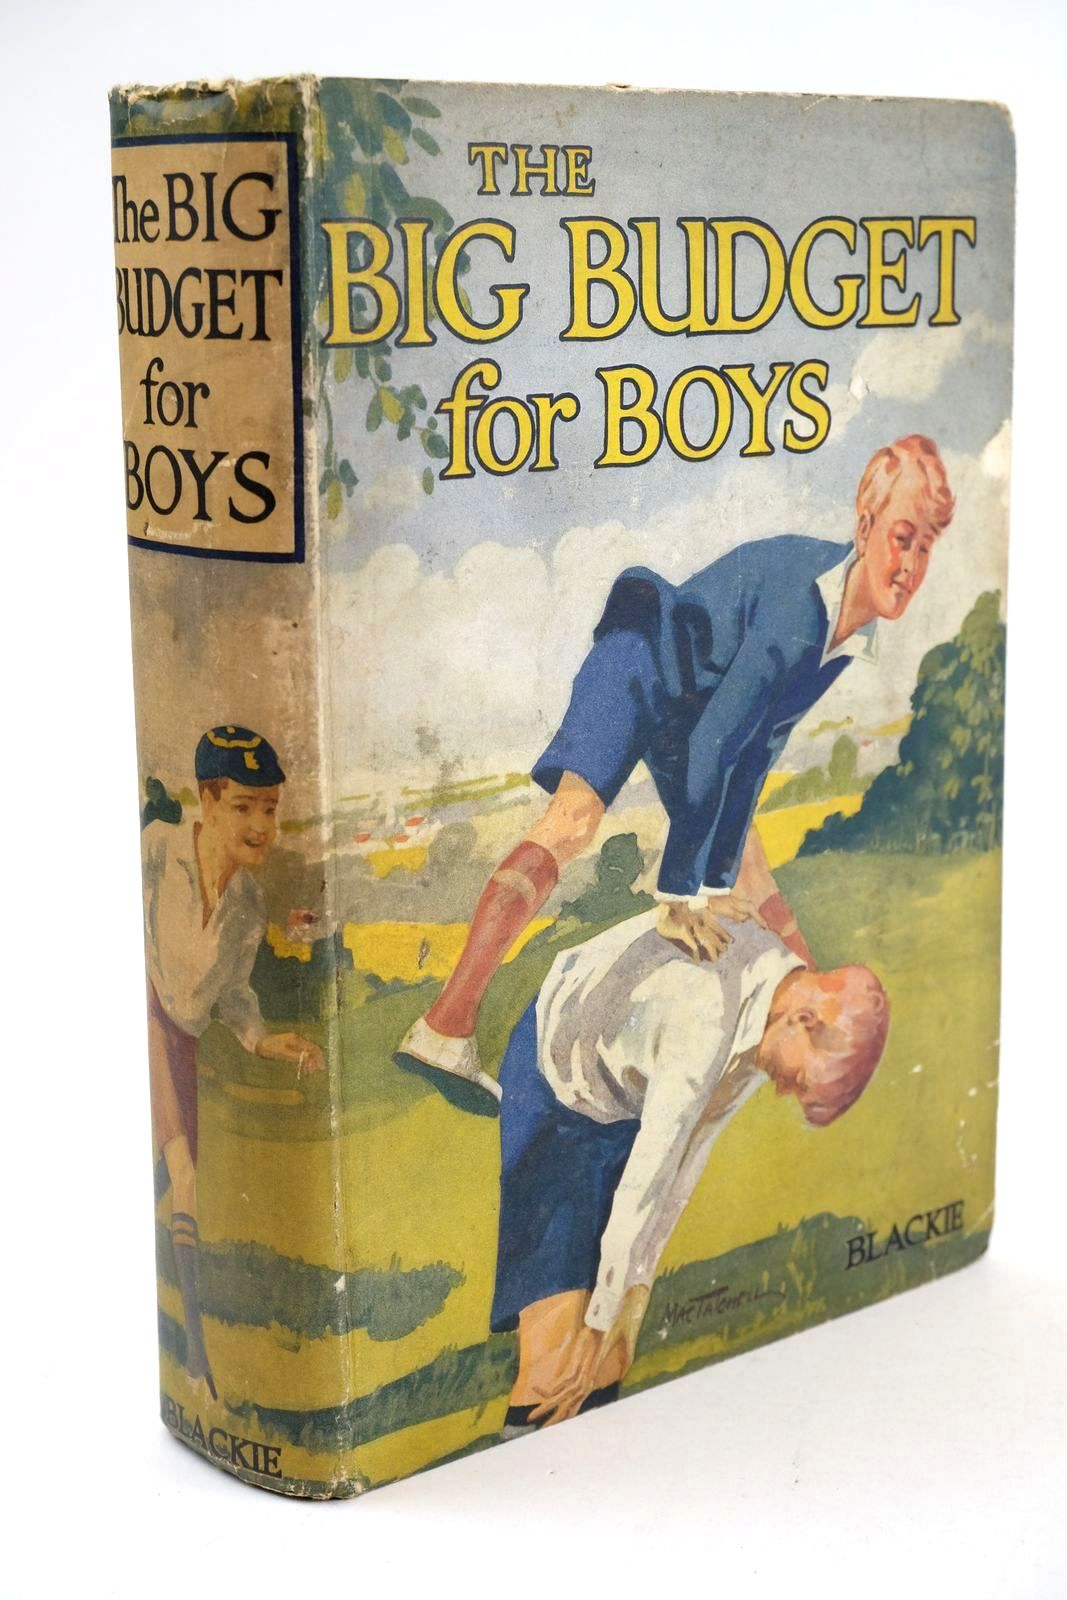 Photo of THE BIG BUDGET FOR BOYS written by Holmes, W.K. Coales, K. Wallis Havilton, Jeffrey et al, Westerman, Percy F. illustrated by Lumley, Savile Wigfull, W. Edward Prater, Ernest Brock, R.H. et al., published by Blackie &amp; Son Ltd. (STOCK CODE: 1325135)  for sale by Stella & Rose's Books